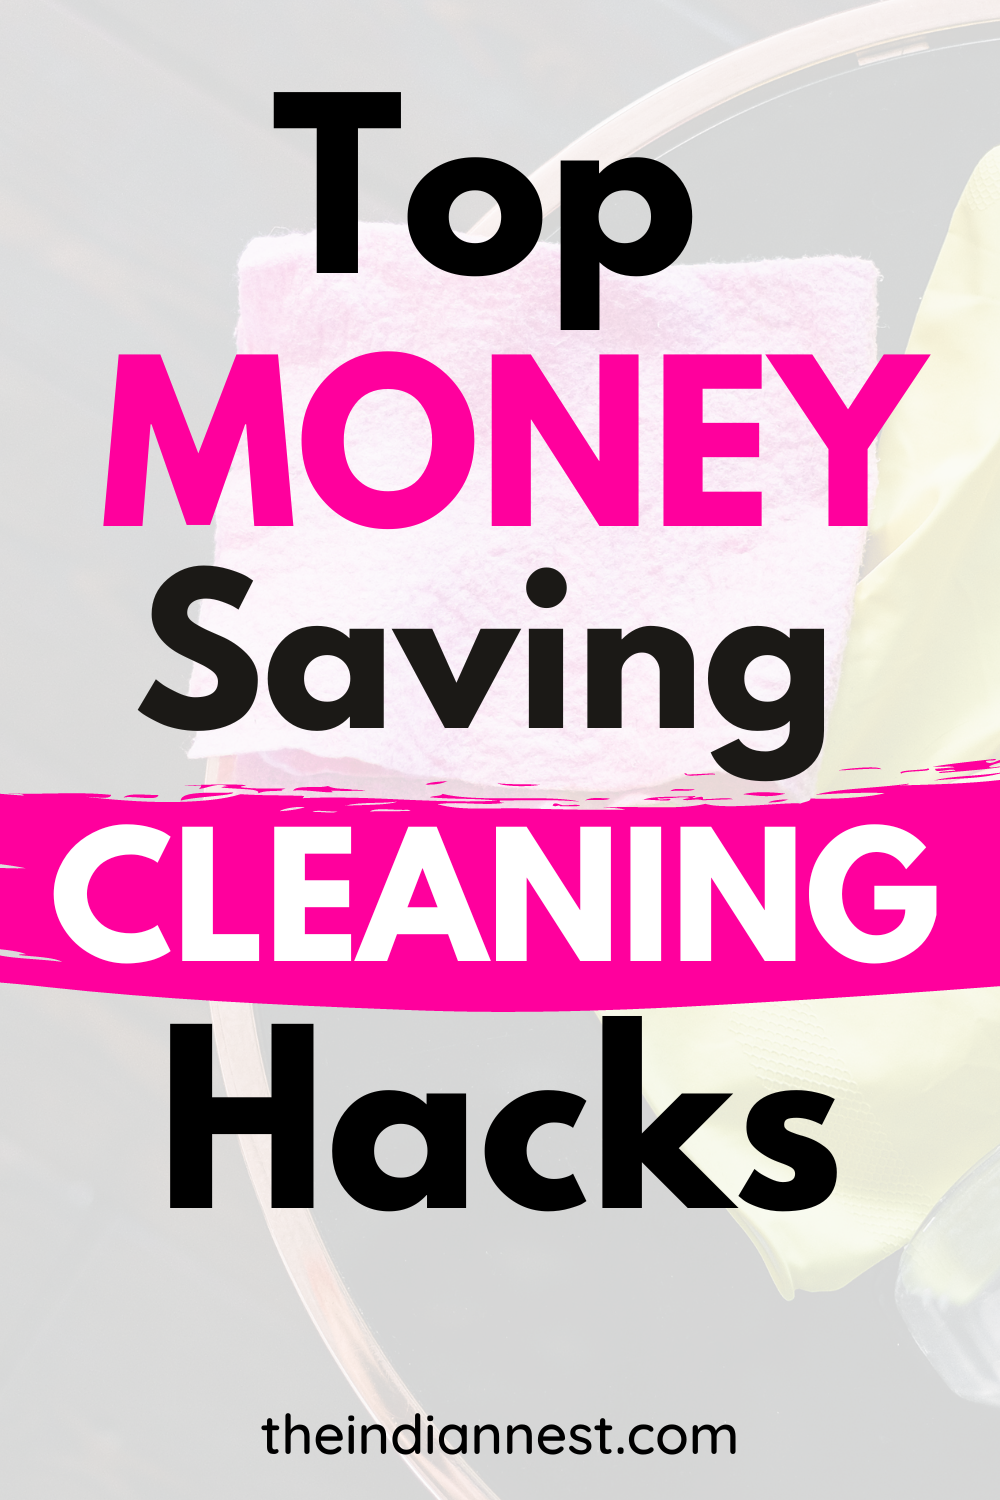 Money saving cleaning hacks helps you to save money